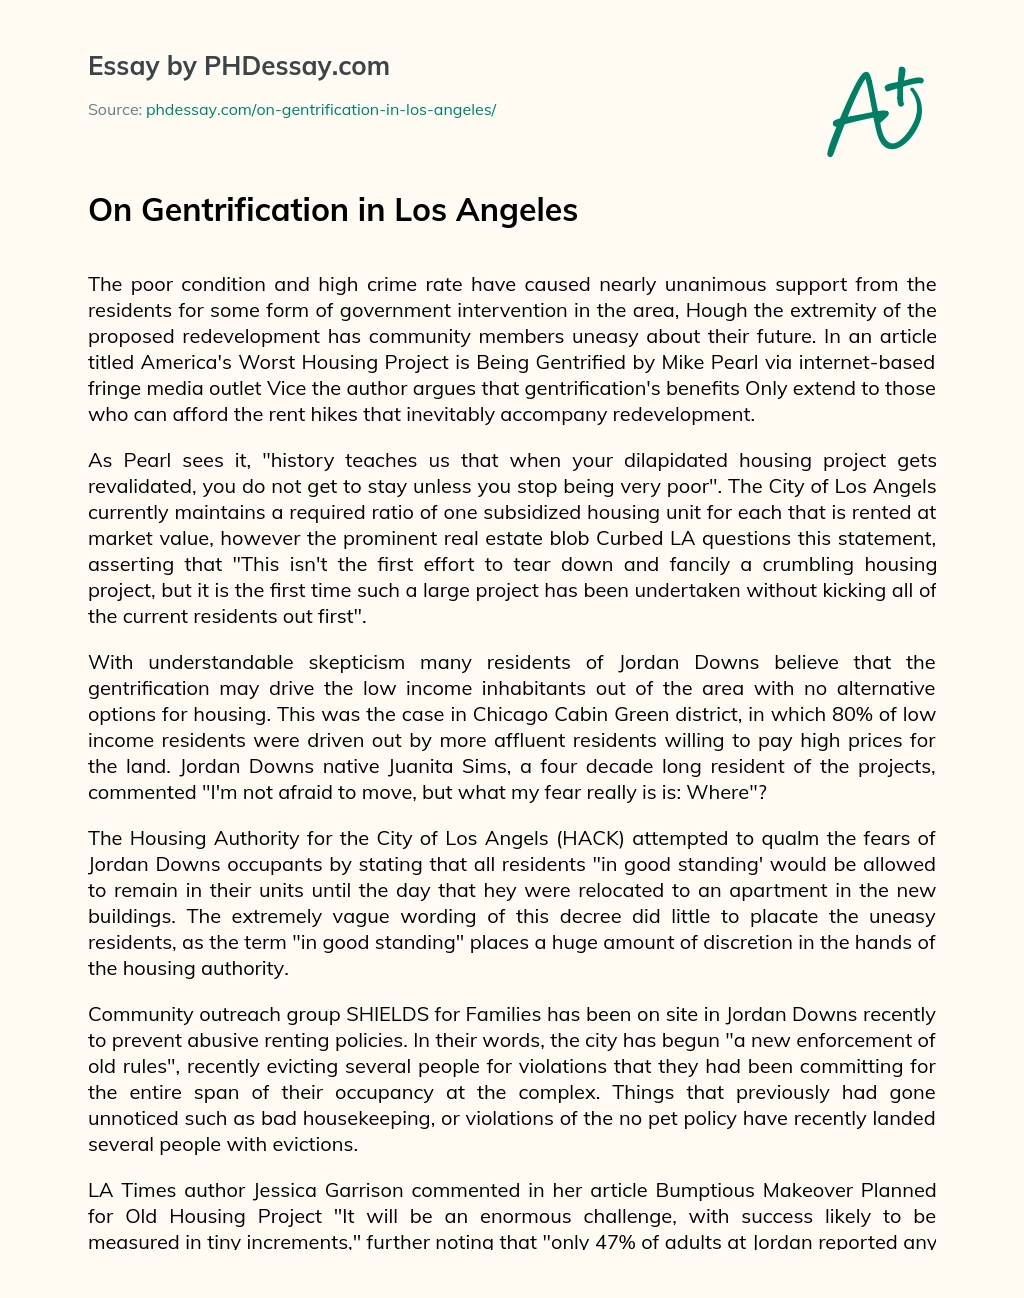 On Gentrification in Los Angeles essay